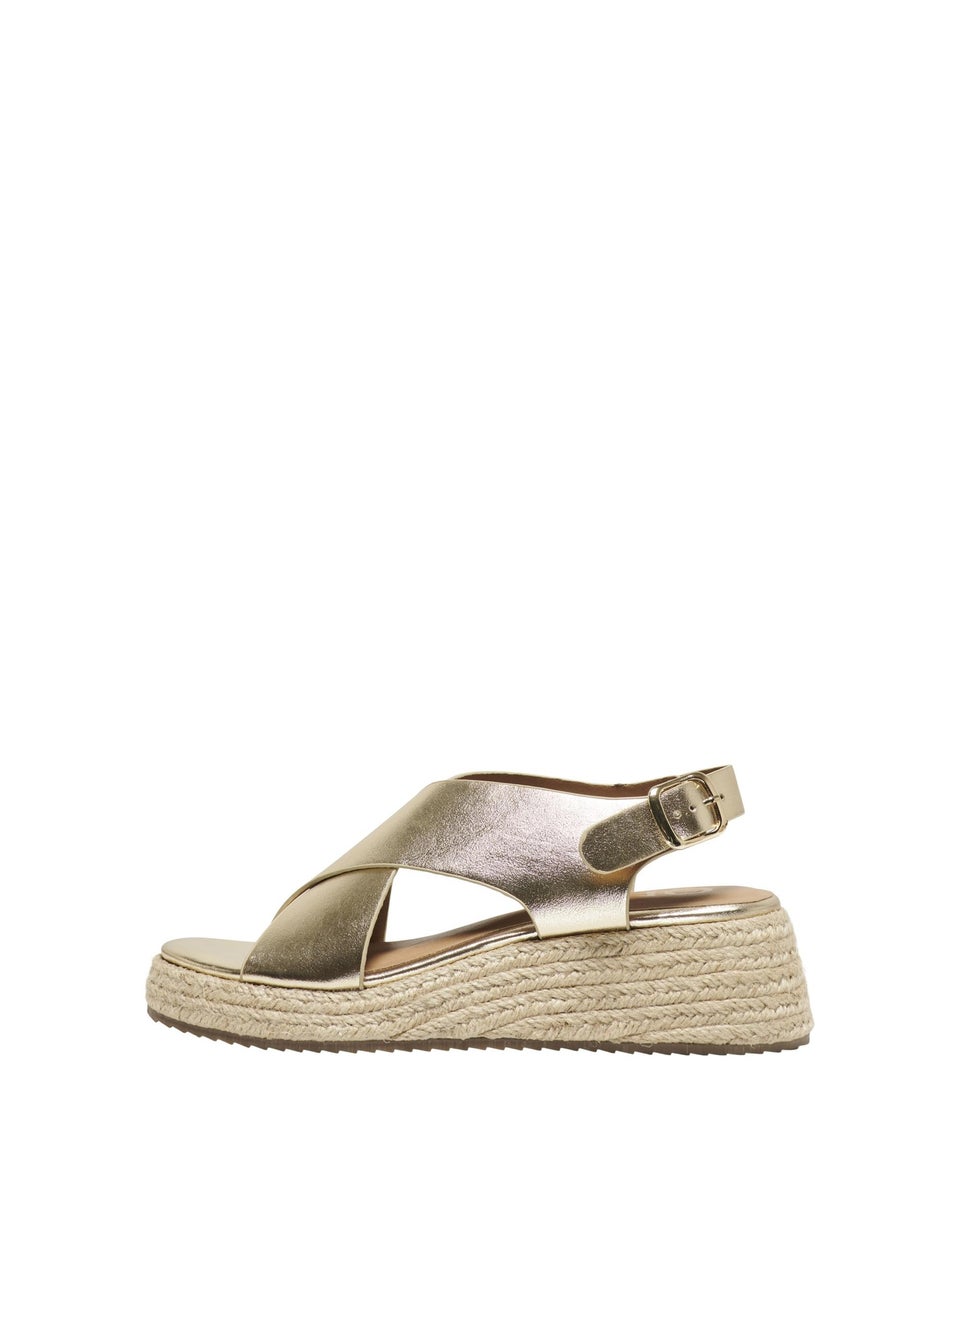 ONLY Gold Cross Strap PU Sandals